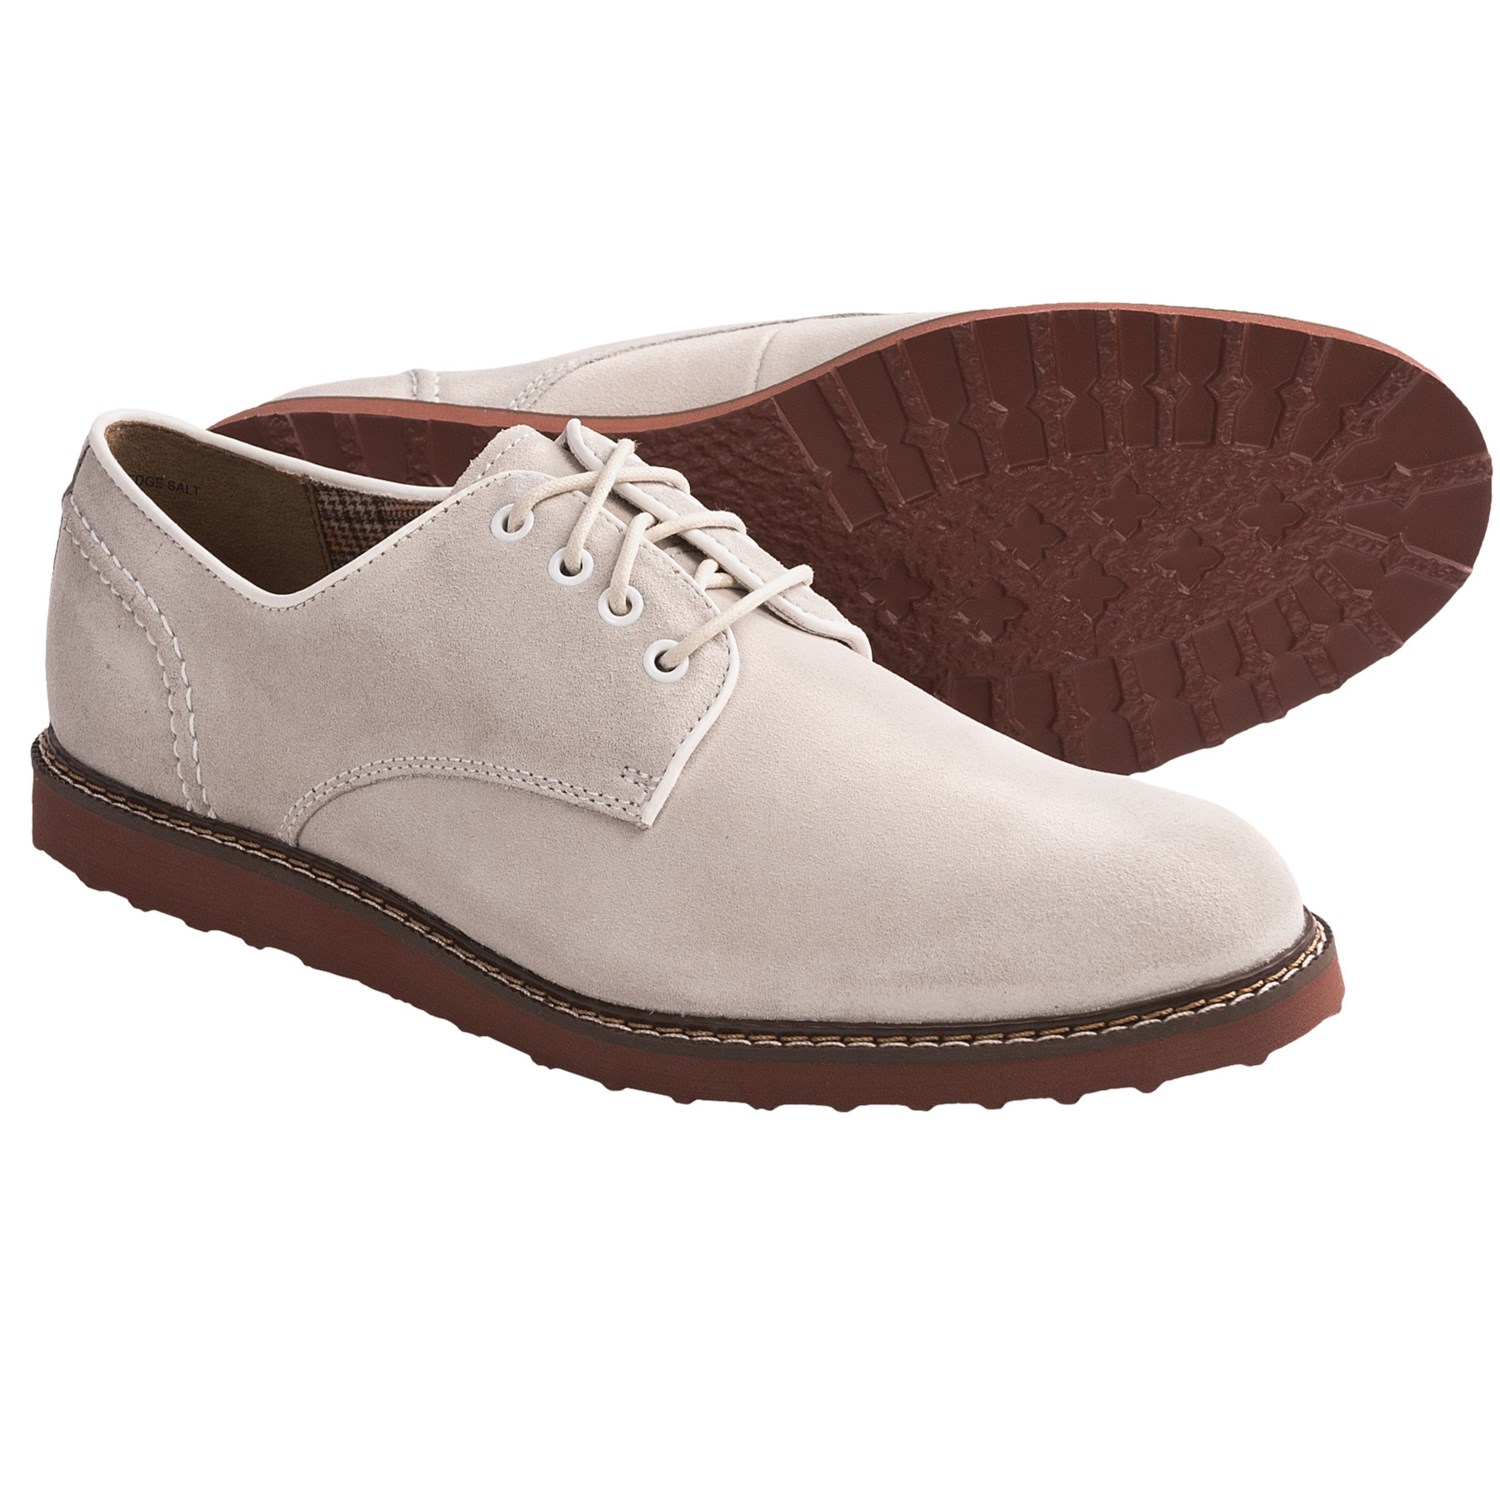 Hush Puppies Derby Wedge Shoes - Water-Resistant Suede (For Men) in ...